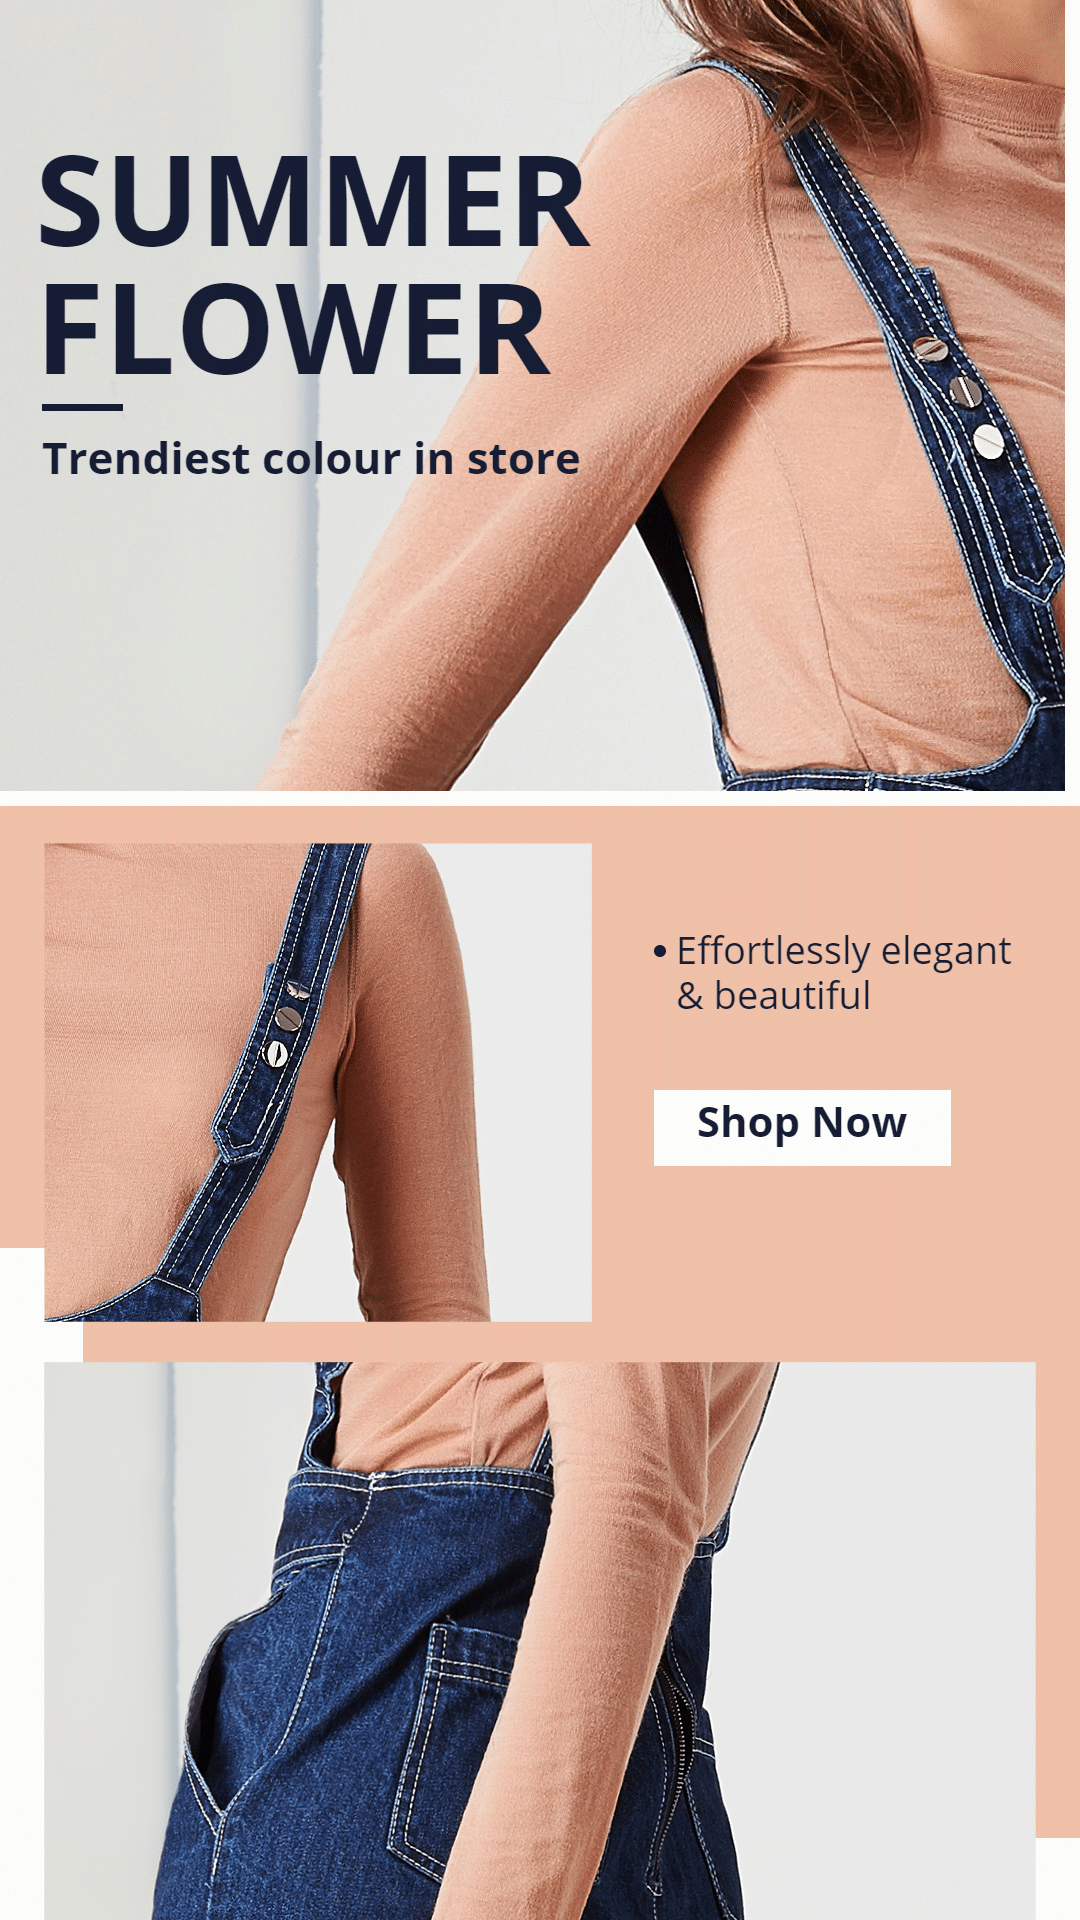 Simple Fashion Women's Wear Detail Display Promotion Ecommerce Story